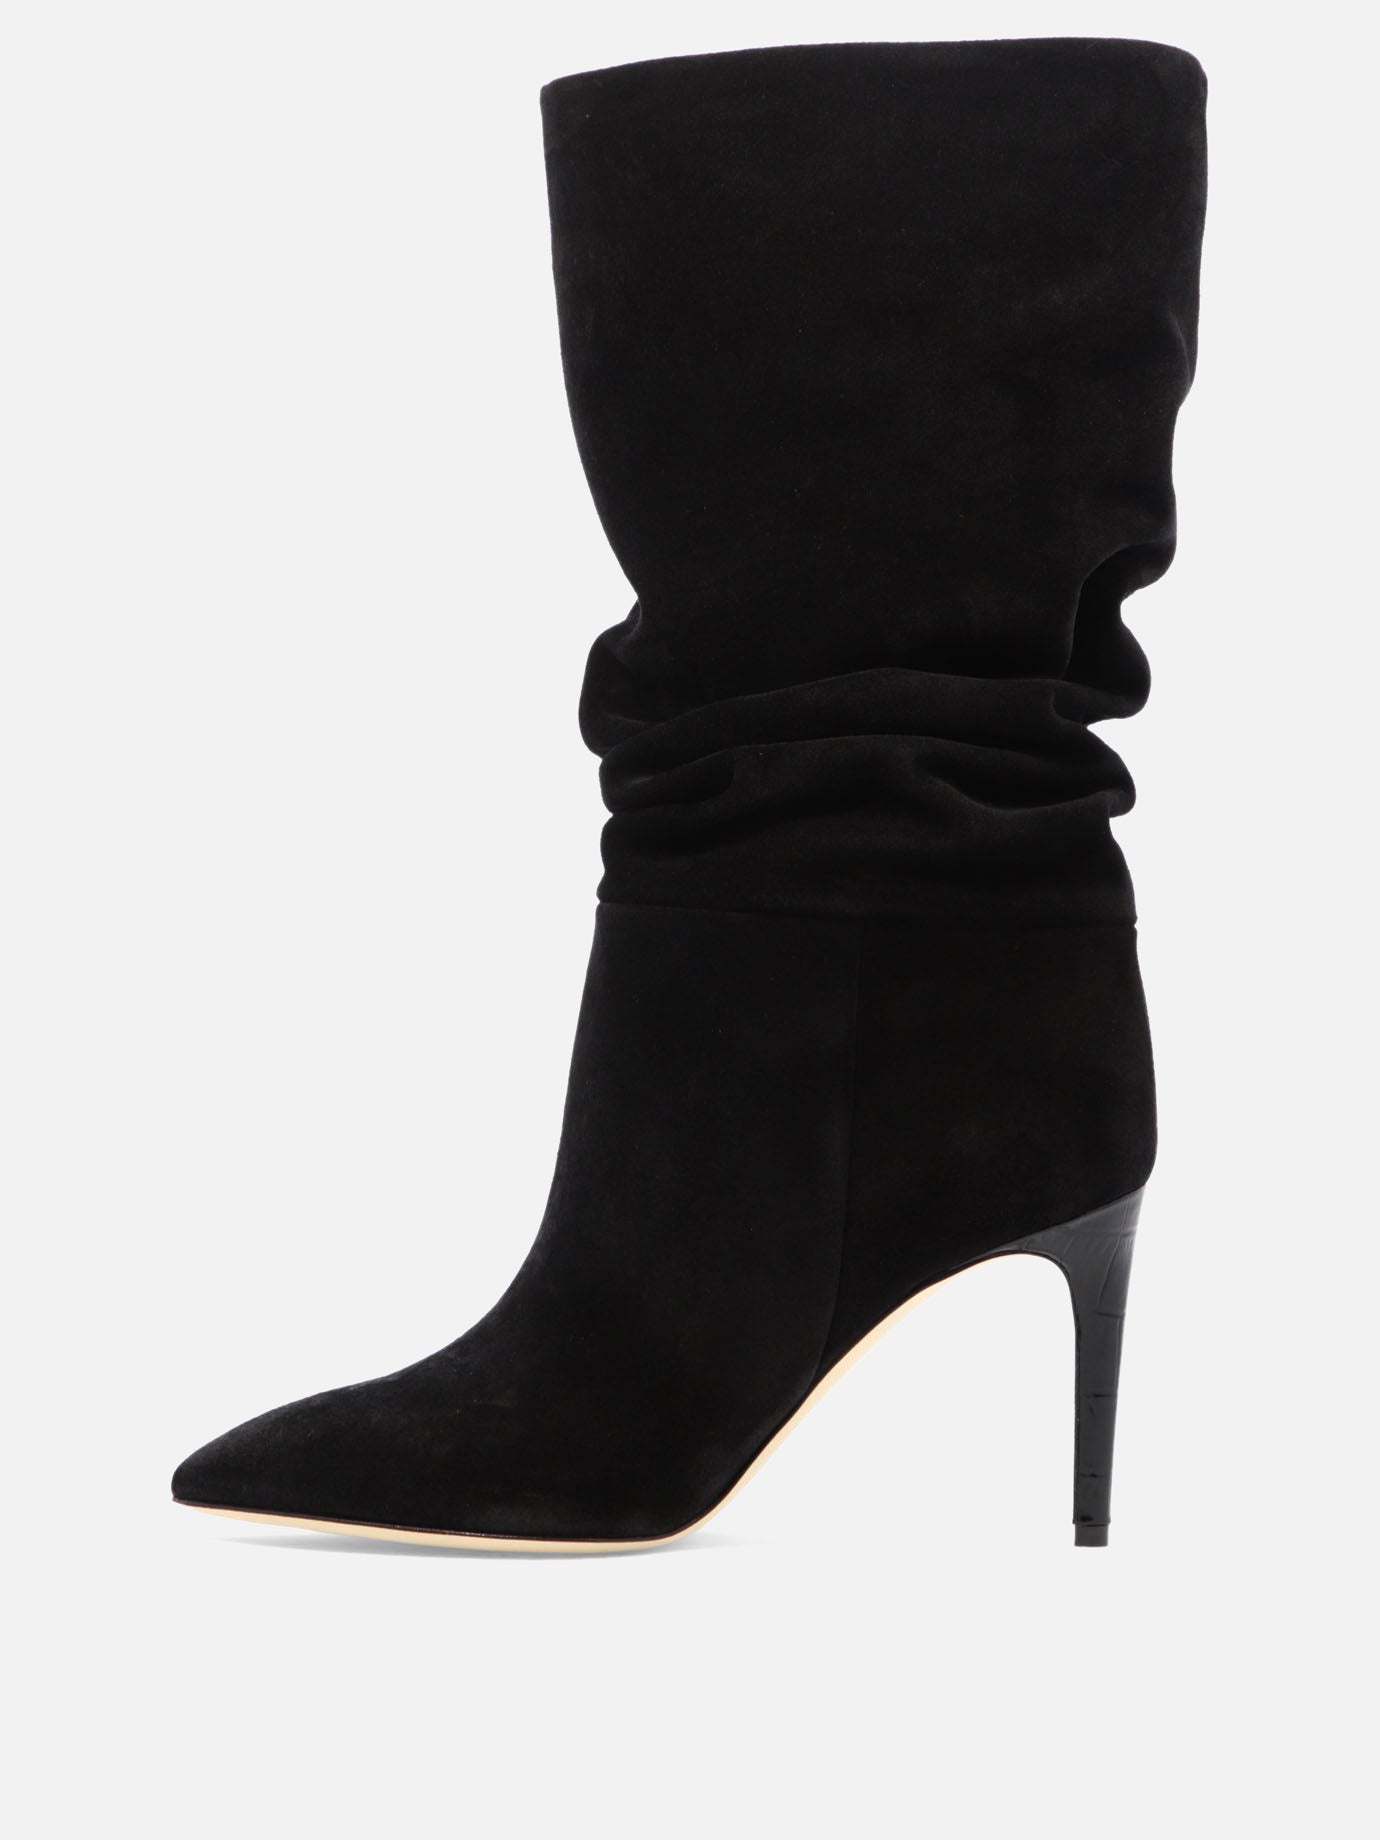 "Slouchy 85" ankle boots